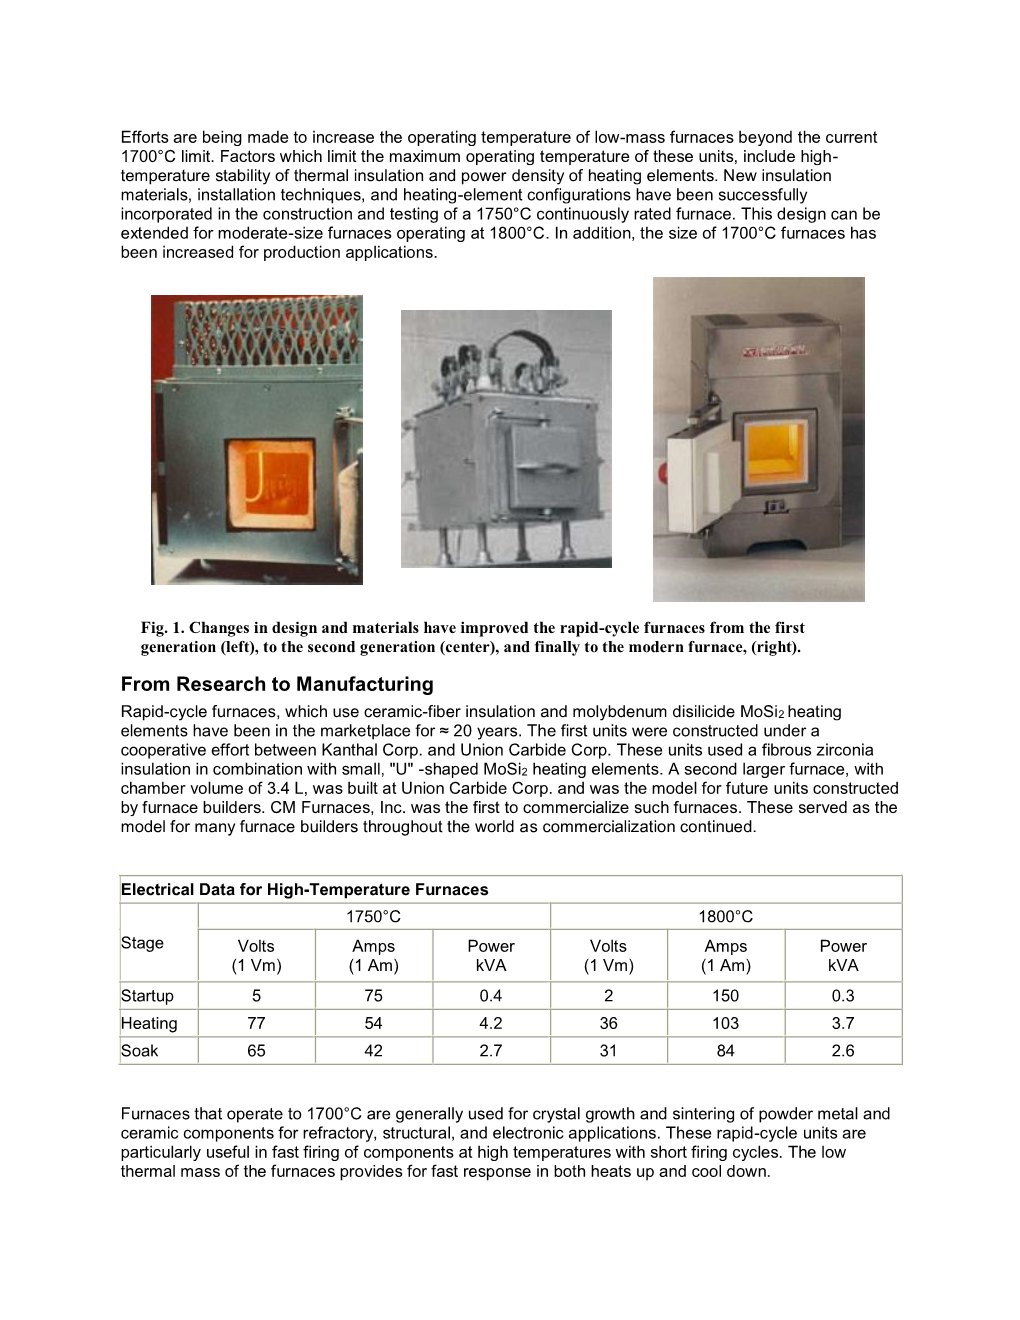 Design of Low Mass Furnaces for High Temperatures